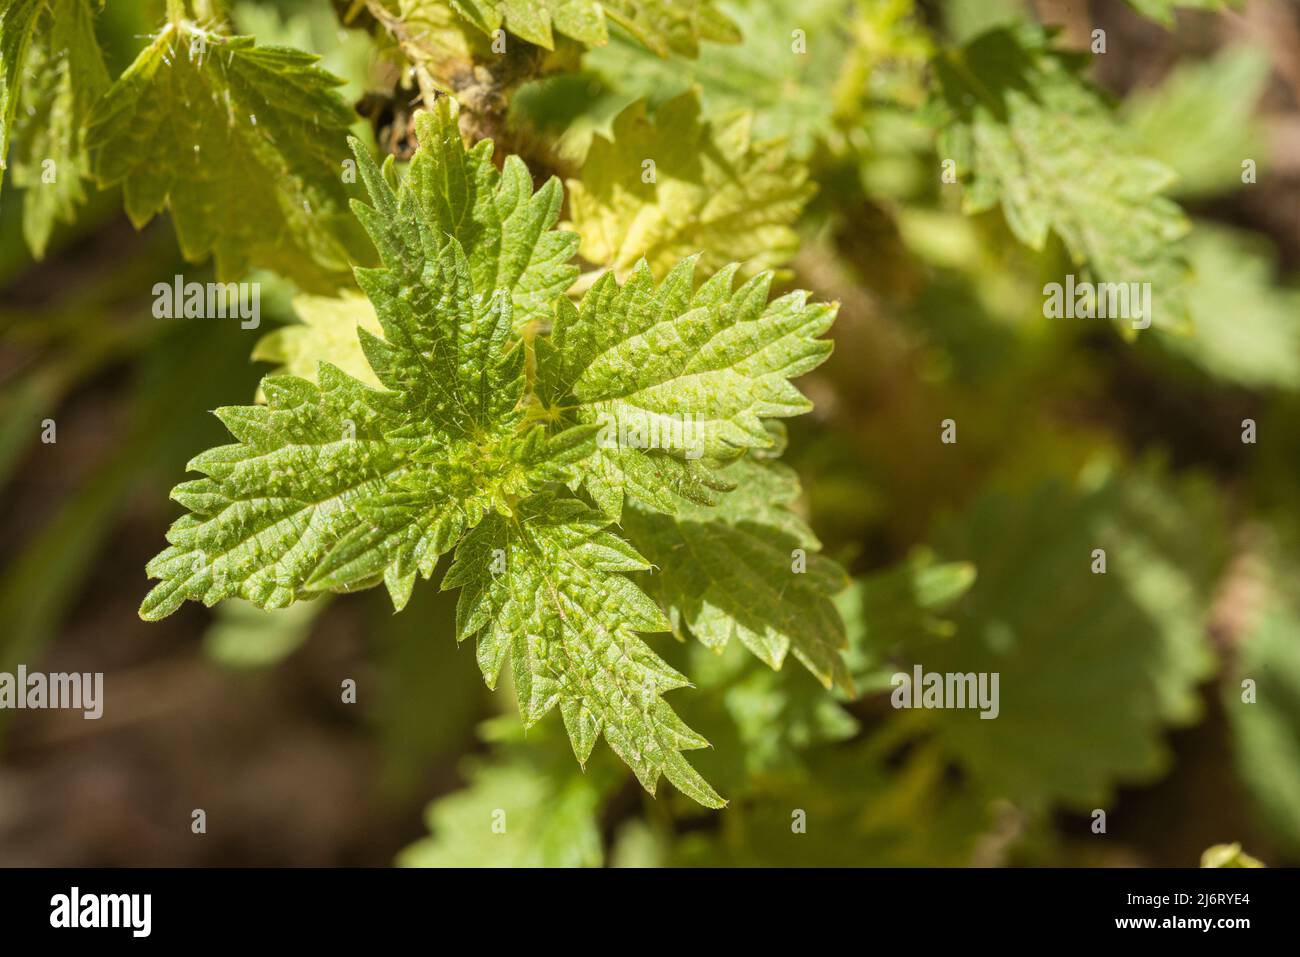 Green leaves of nettle plant in forest Stock Photo